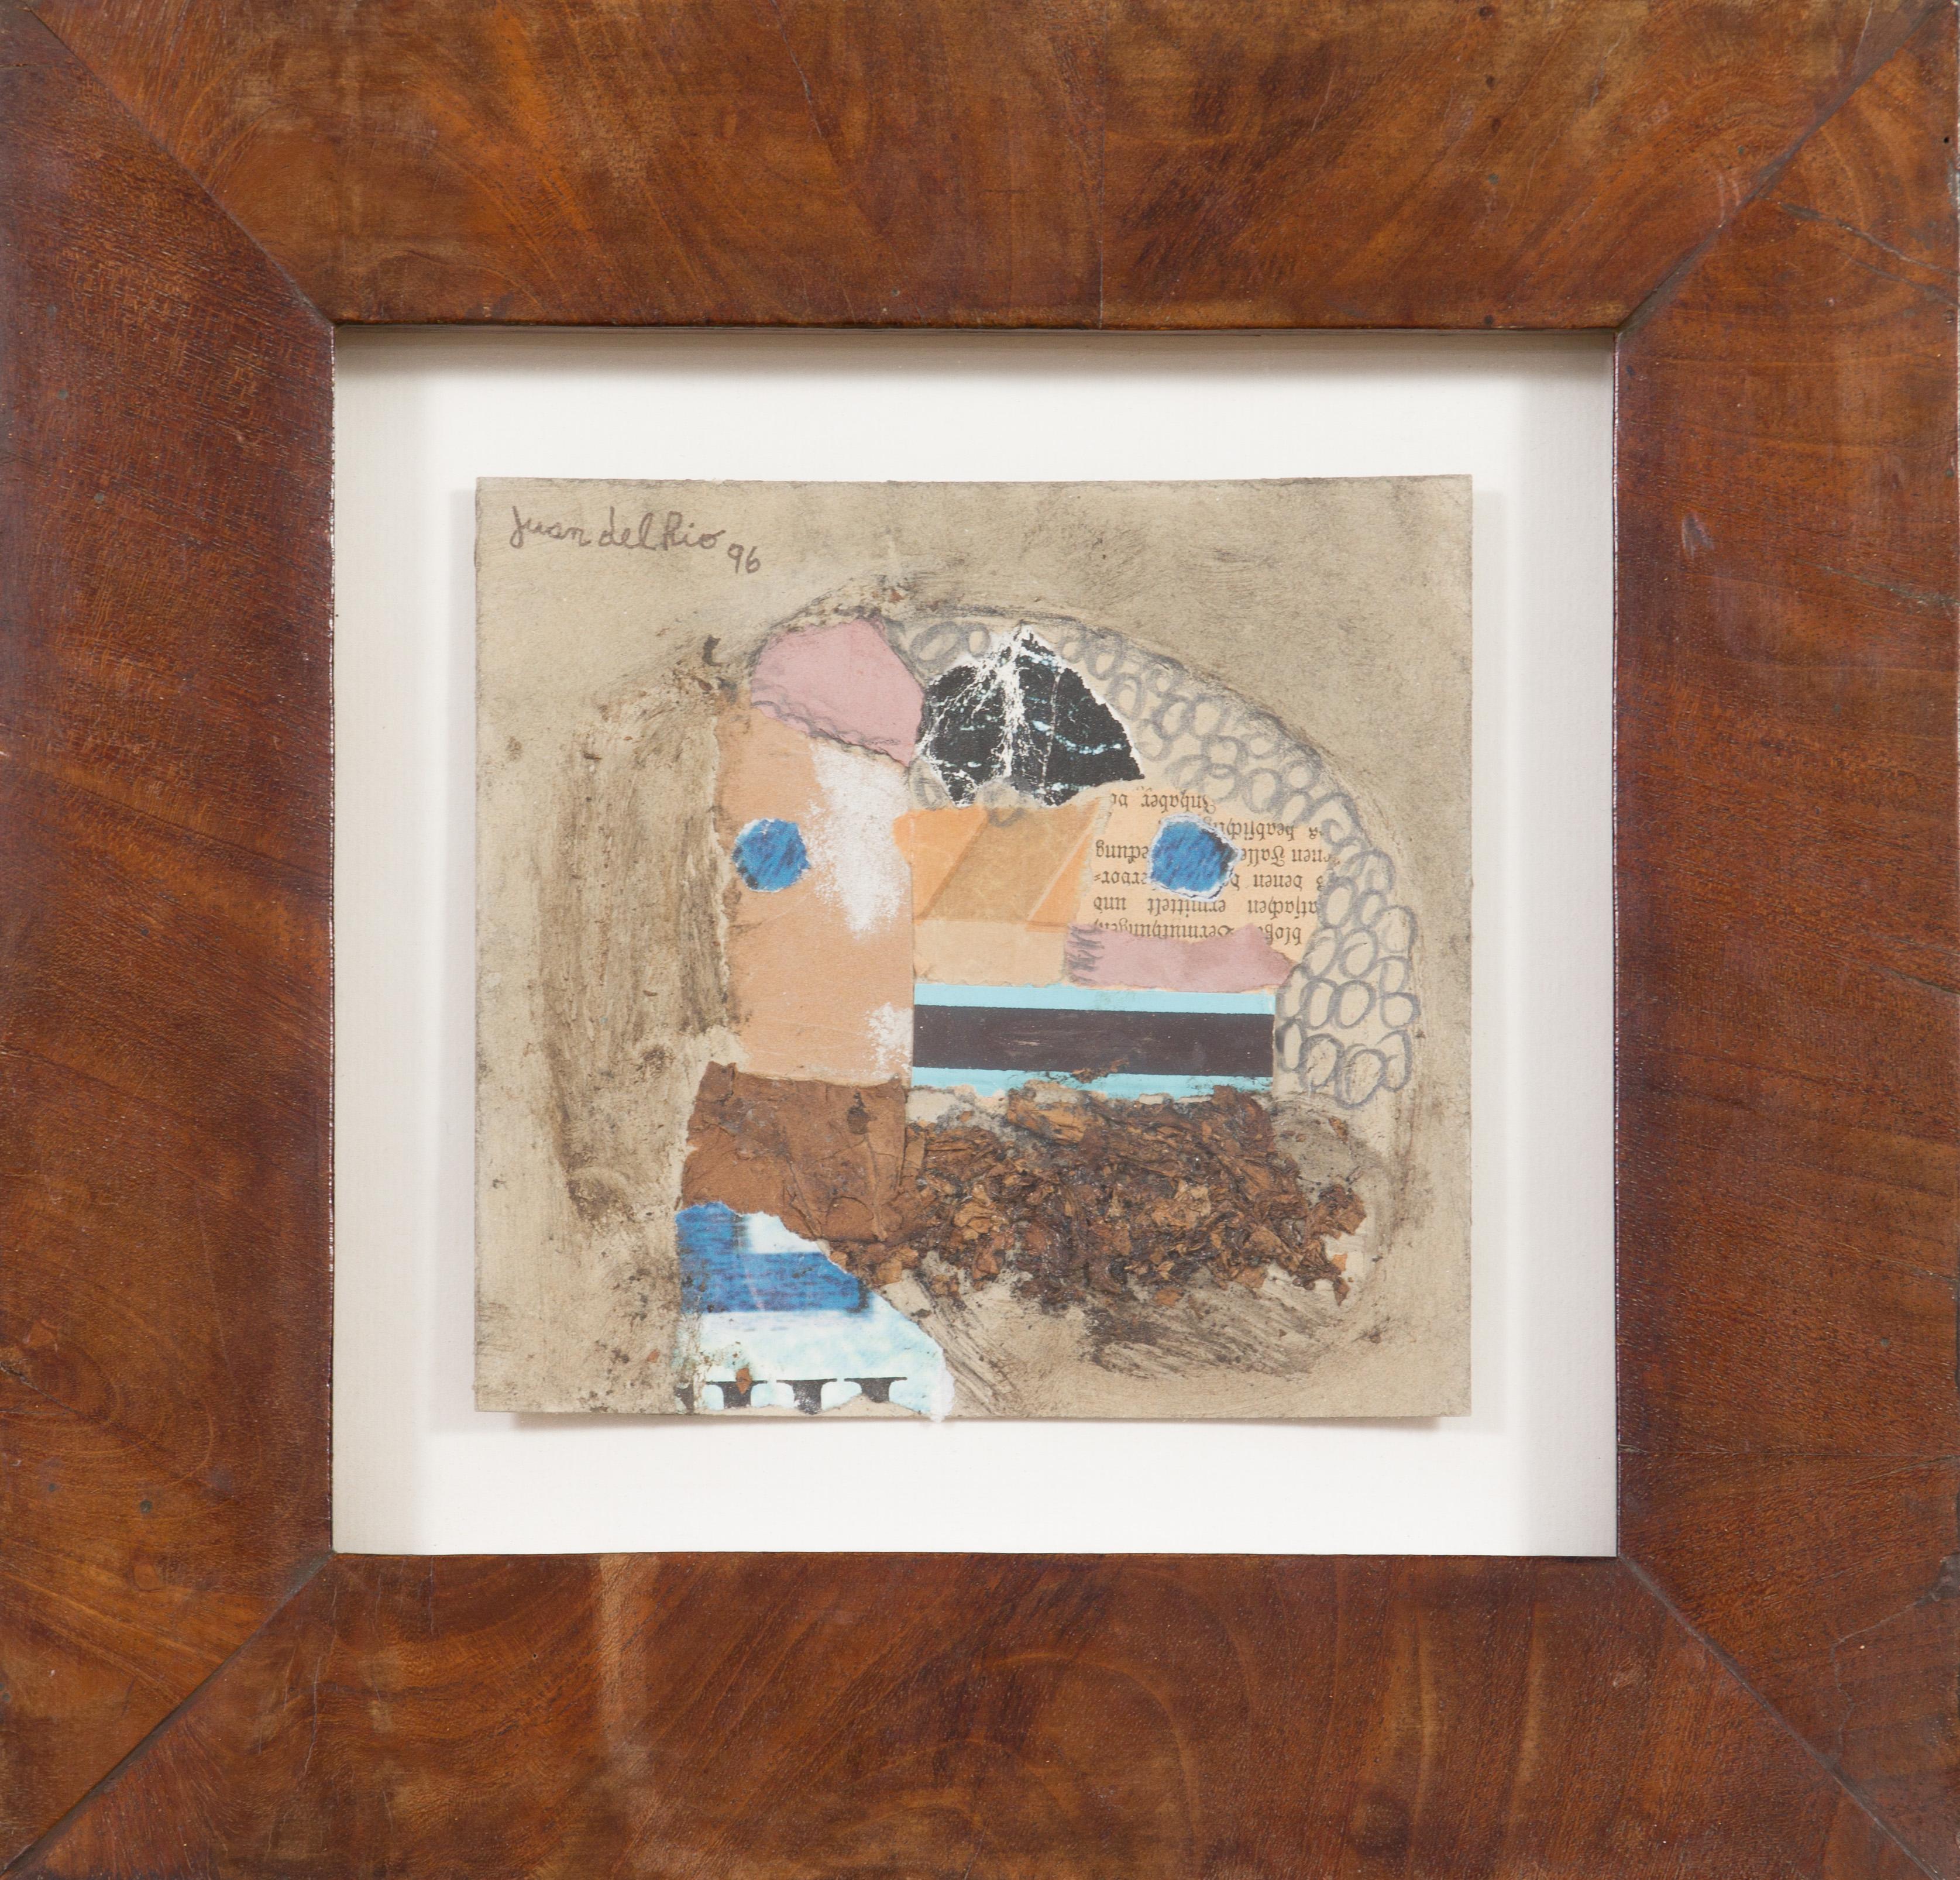 - The artwork is a untitled material image / collage / assemblage
- Material: pencil, newspaper and magazine clippings and tobacco leaves, mounted on cardboard
- Signed 